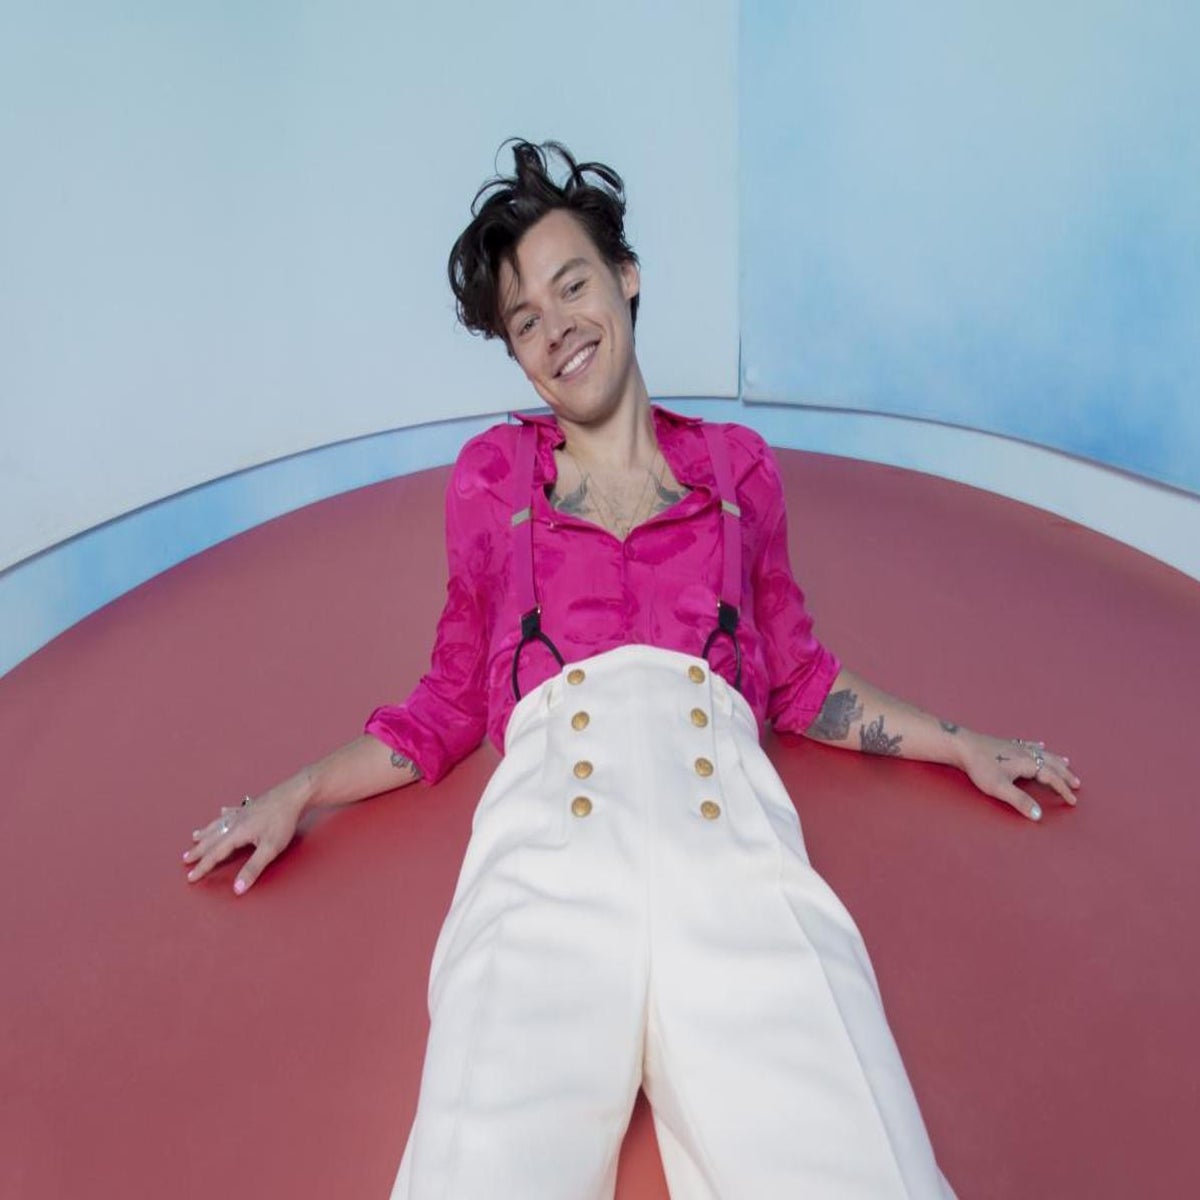 Harry Styles: Everything He's Done Since His 2017 Debut Album